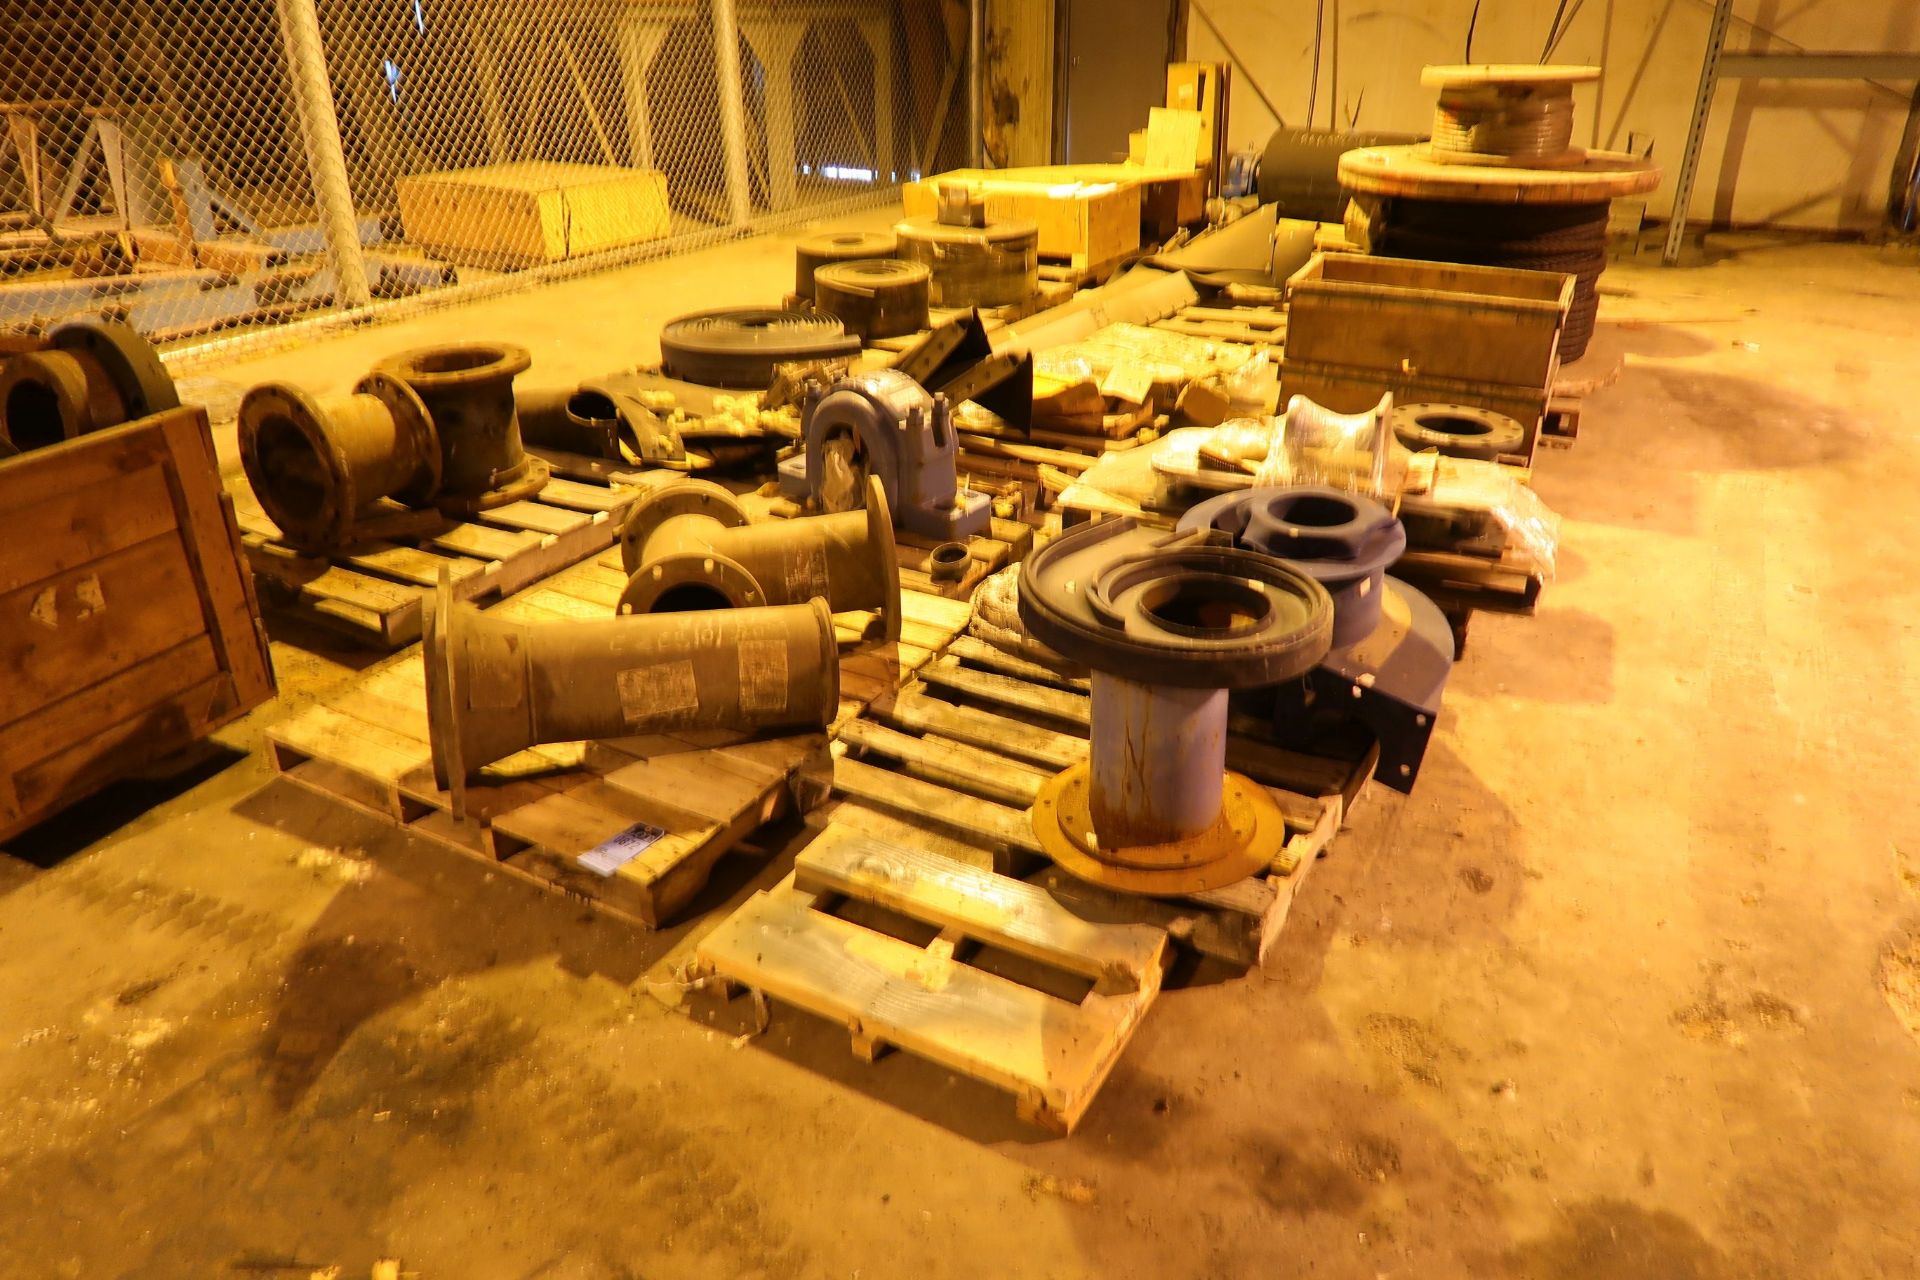 SKIDS MISCELLANEOUS PIPE COUPLINGS, TEES, CABLE, CONVEYOR ROLLER